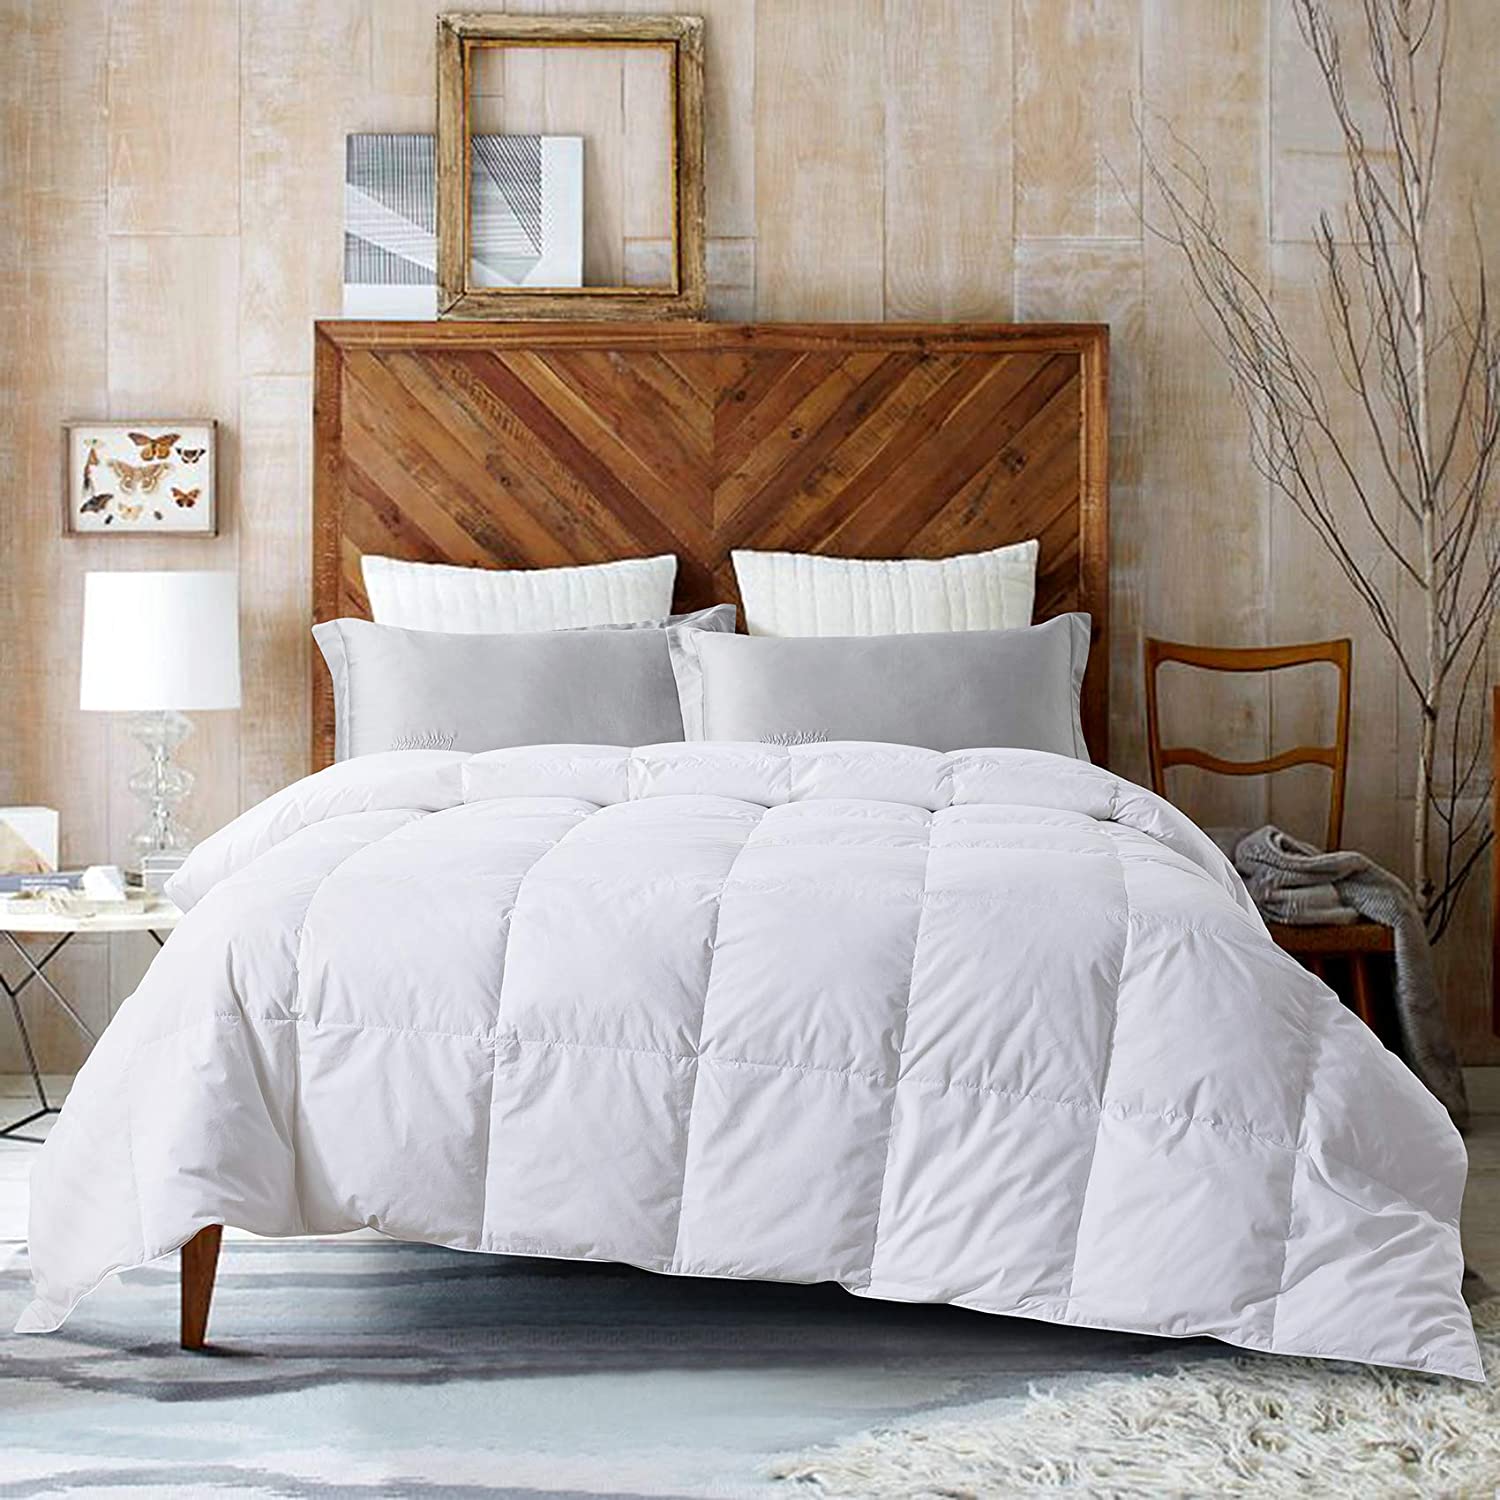 Details about   Ubauba All-Season King Down Comforter 100% Cotton Quilted Feather Comforter with 